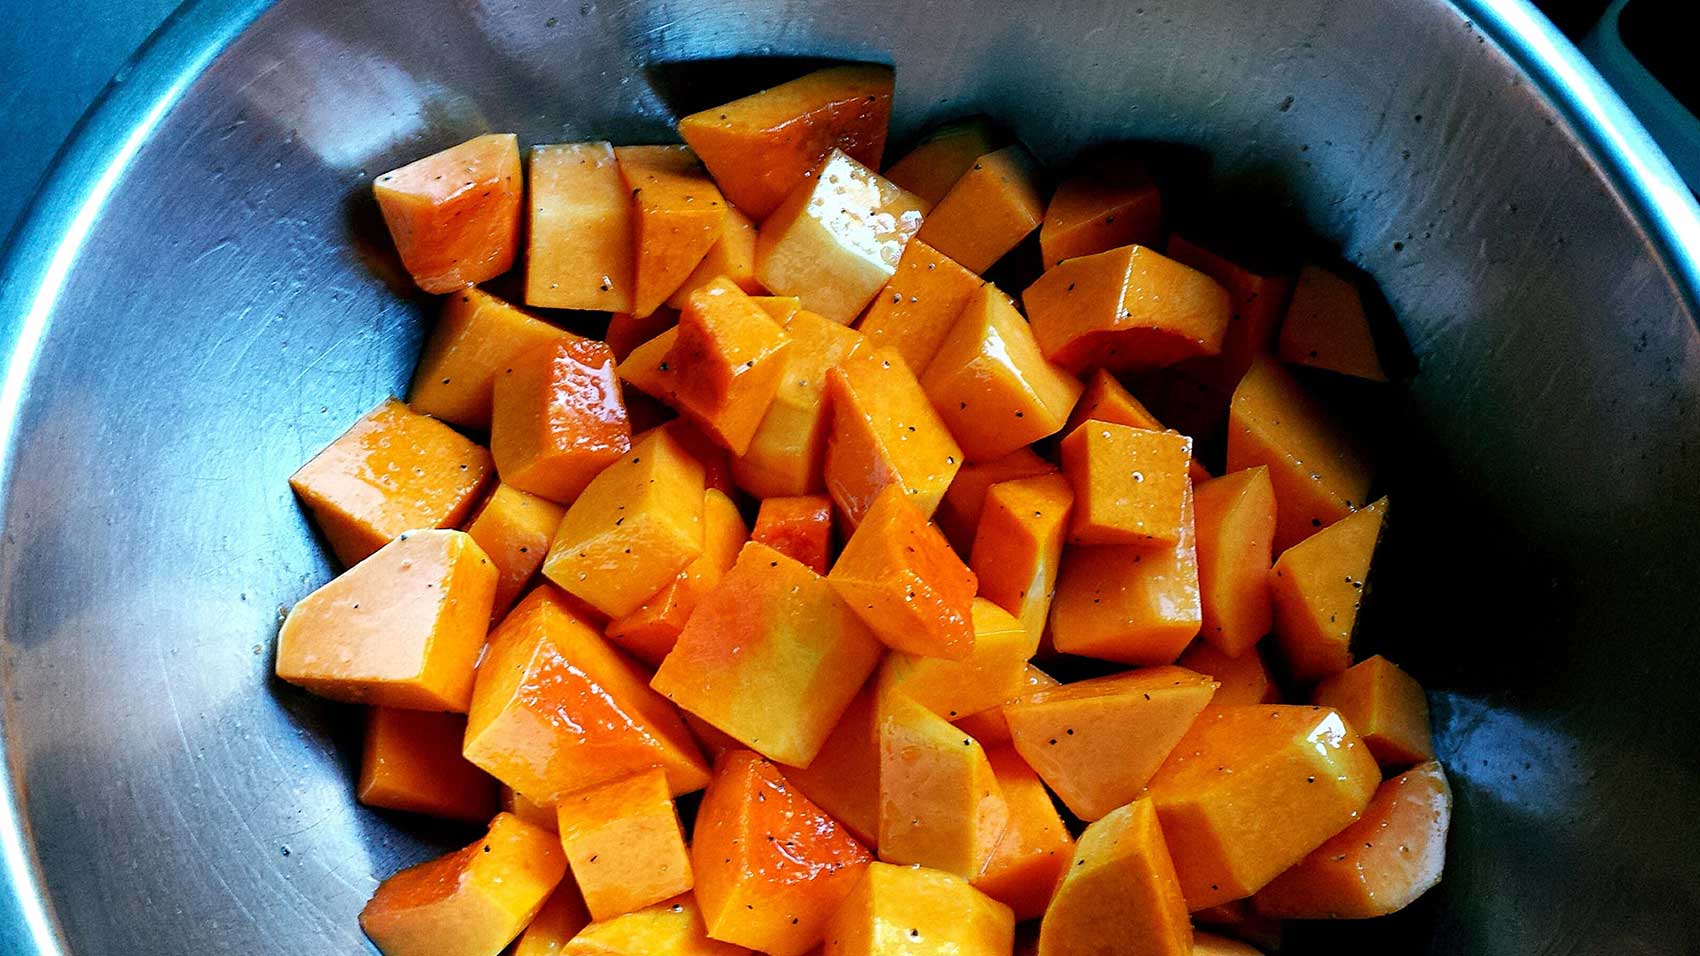 Butternut squash cut up for cooking